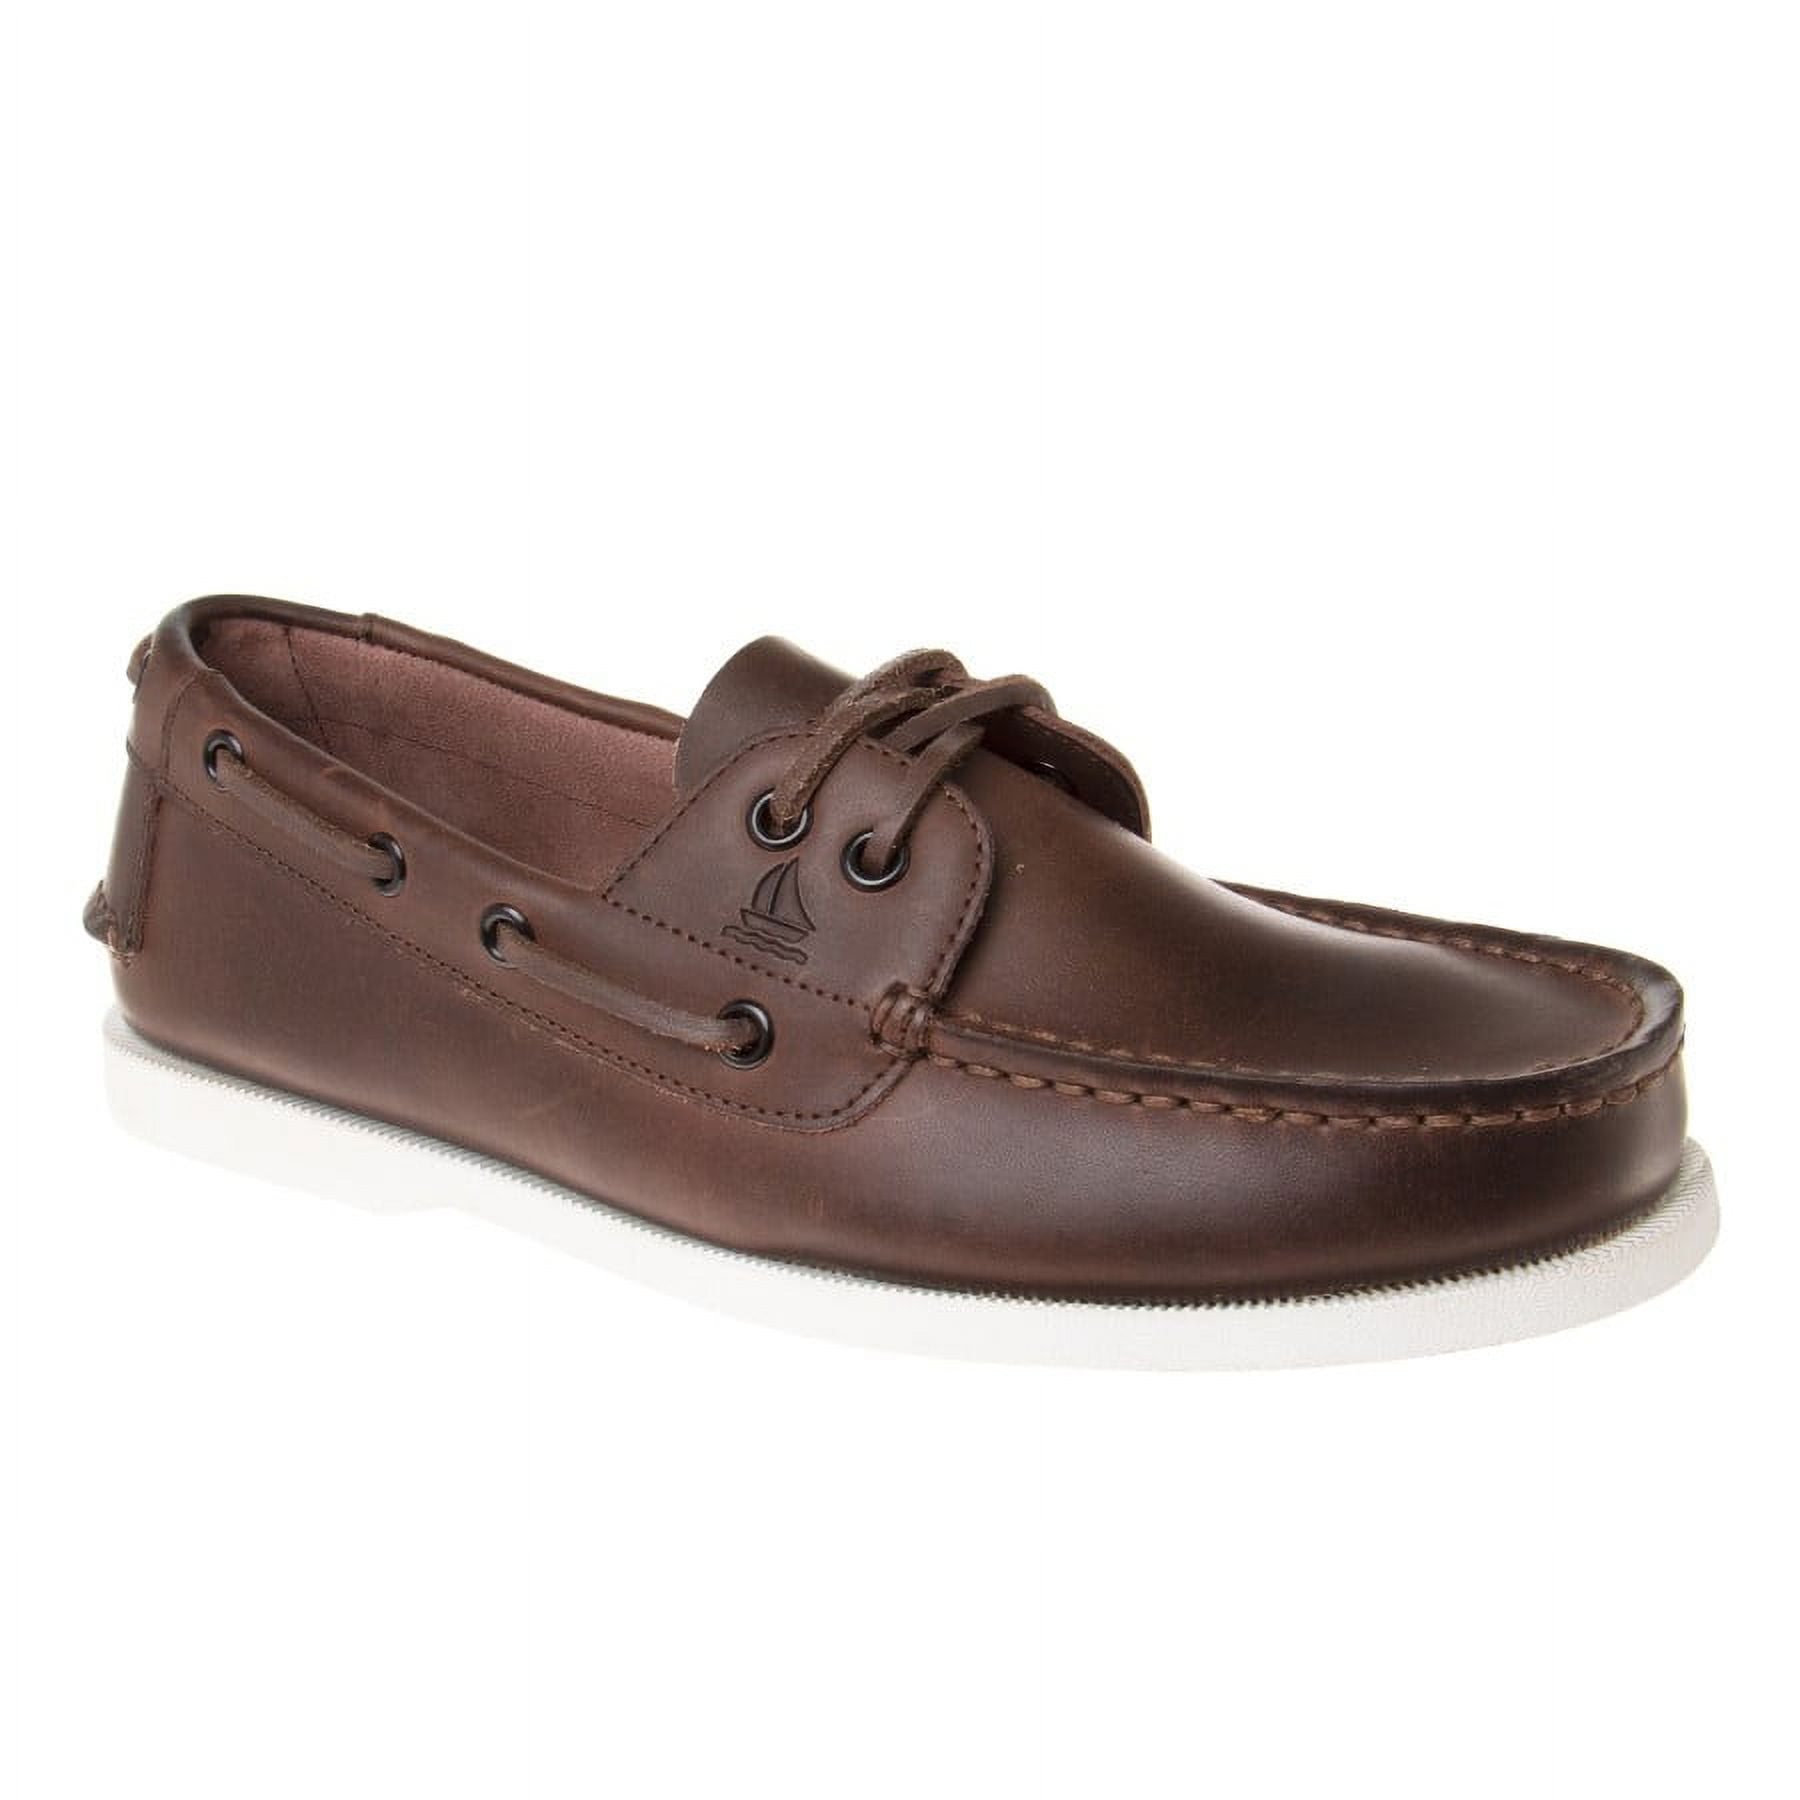 Boat Shoes Explained: History, Style, & How-To Guide